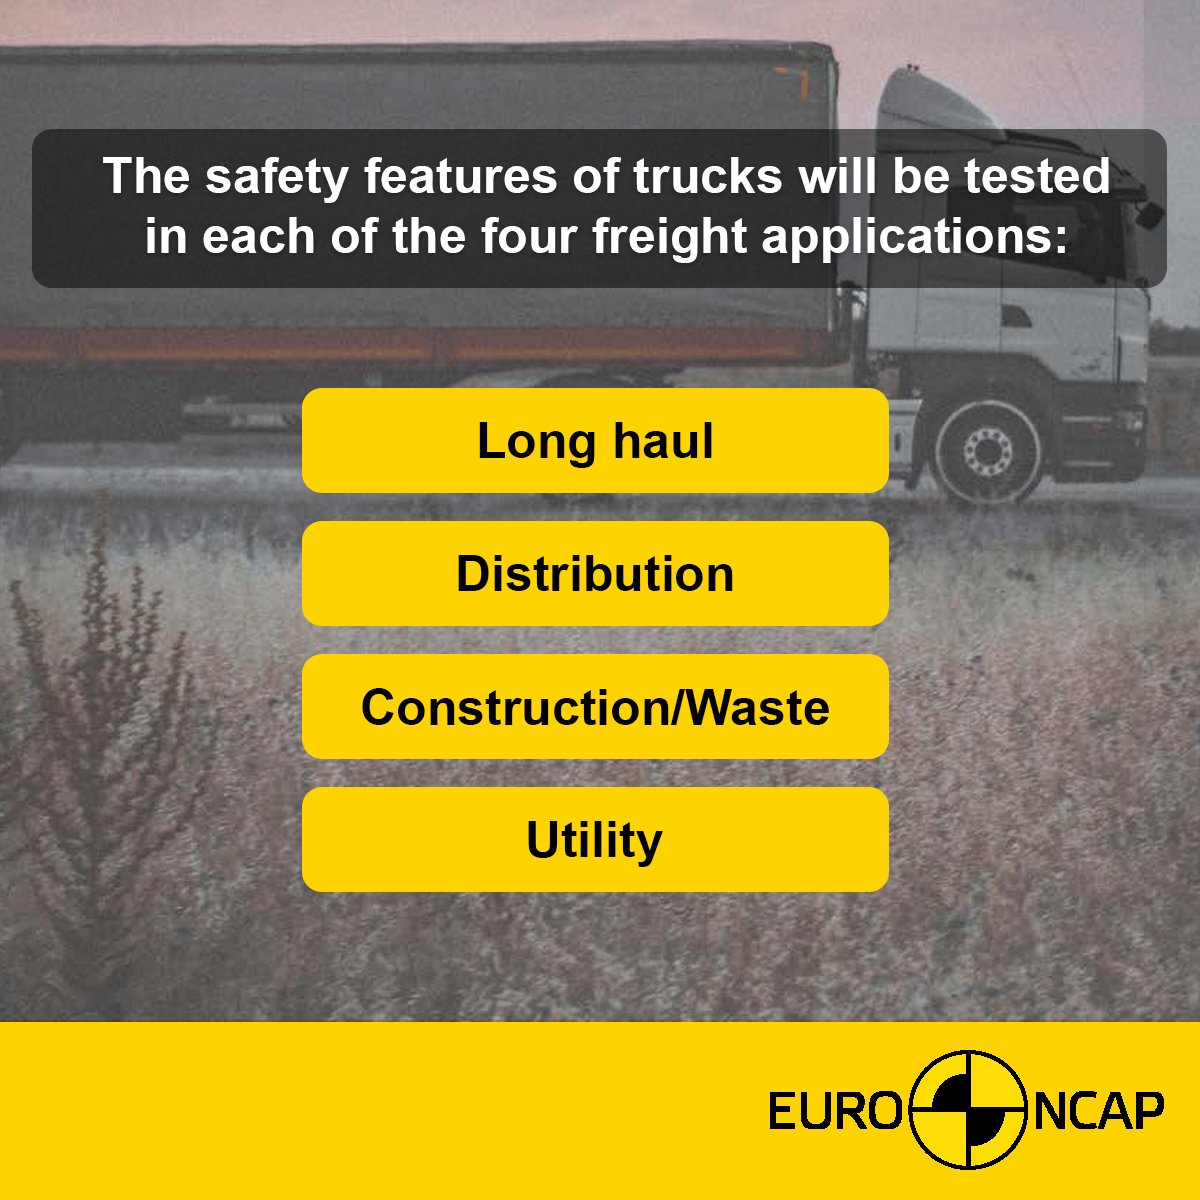 🚚 How will the planned truck safety rating apply? 🚚

Euro NCAP plans to test every safety feature listed in the roadmap for at least one high-sales volume variant from each manufacturer in the four freight applications. 

bit.ly/2304TR

#forsafertrucks